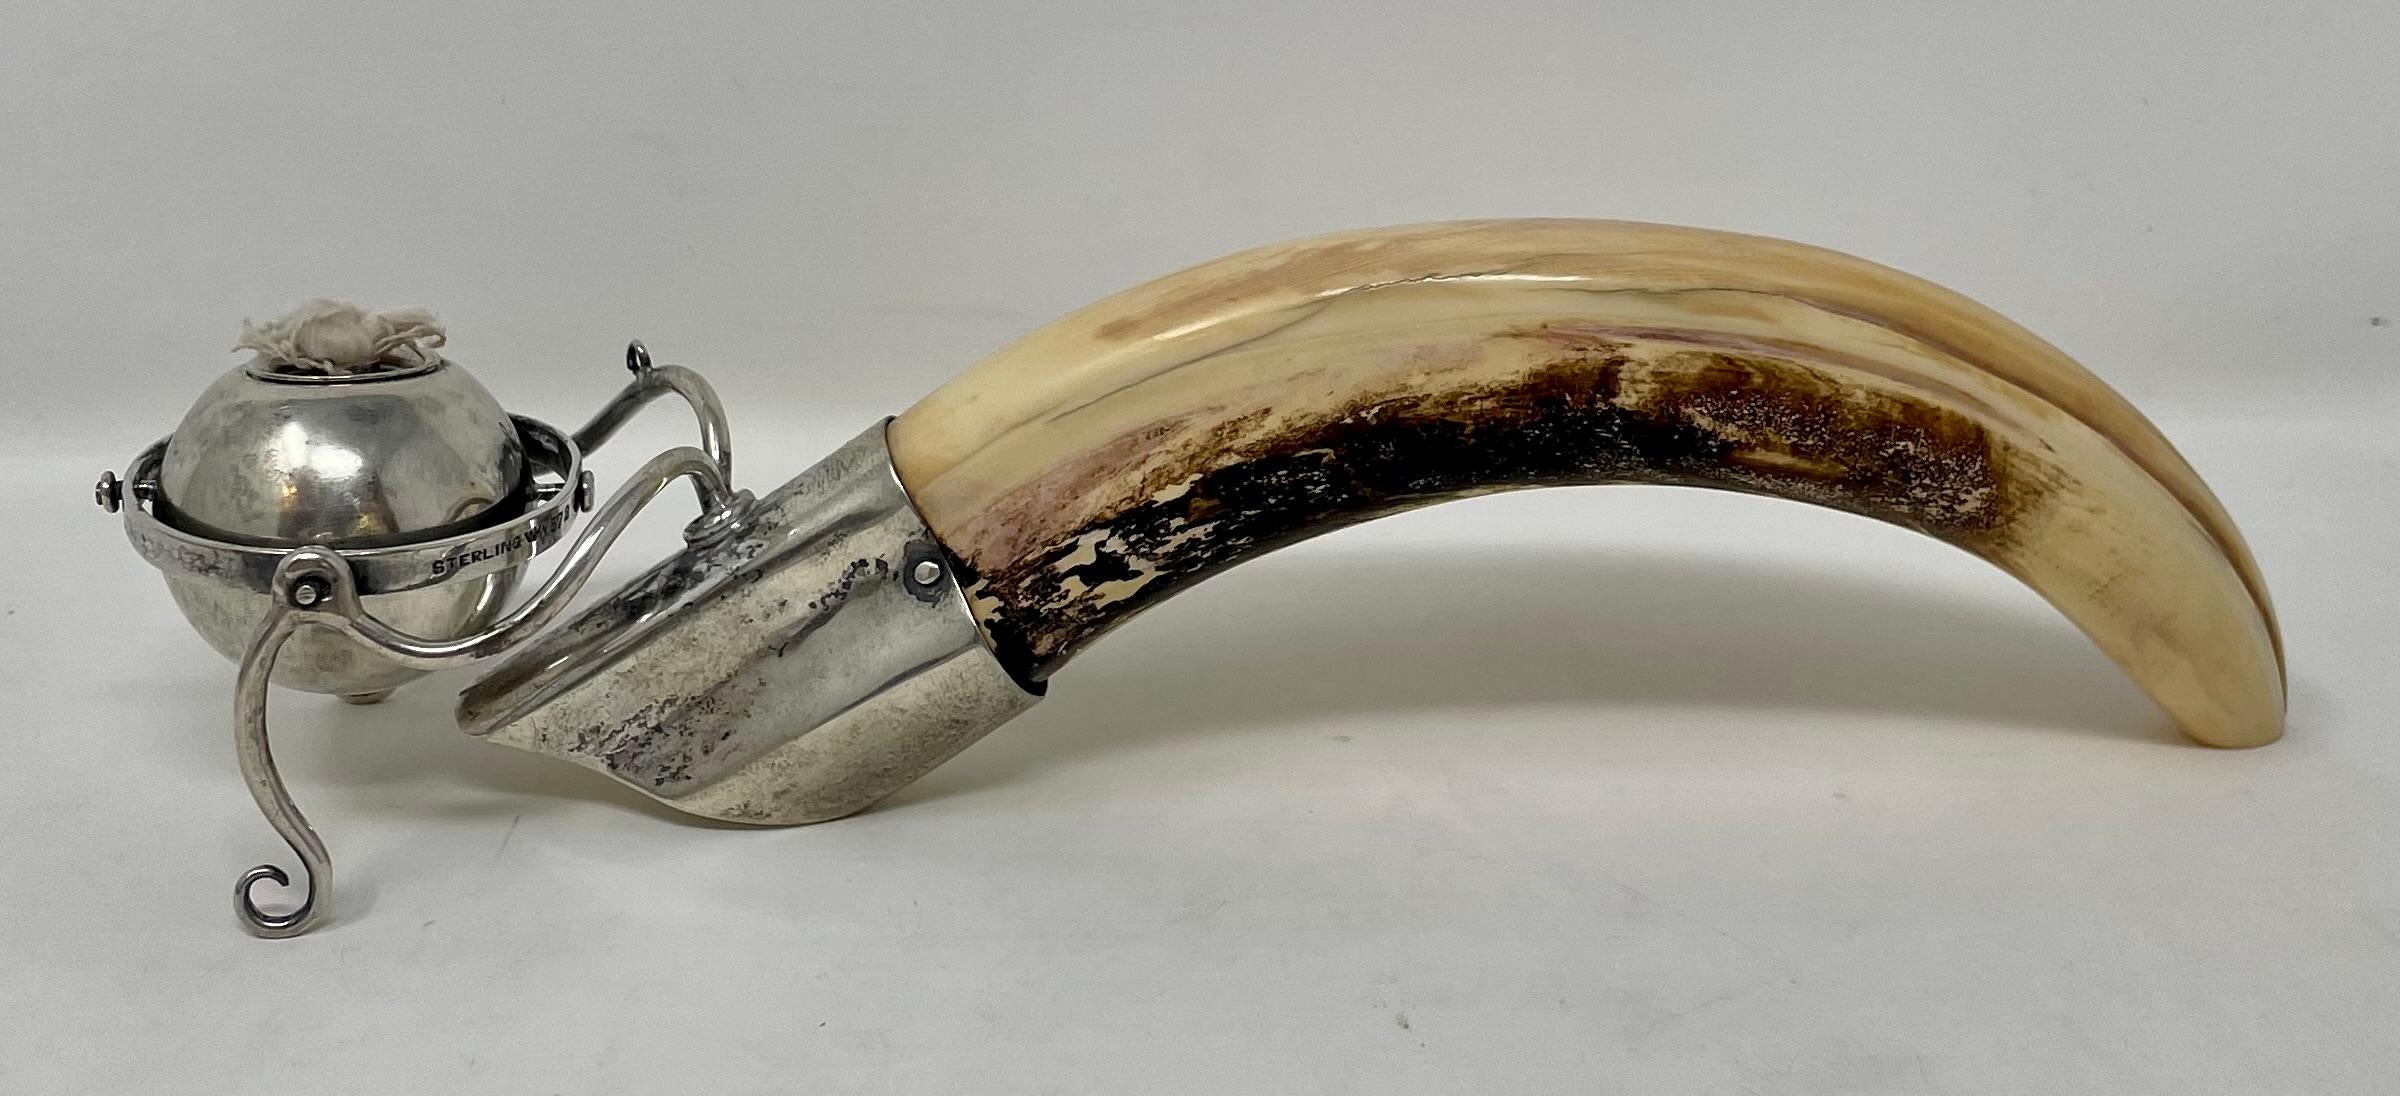 Antique English hallmarked sterling silver with boars tusk gimble lighter, circa 1920.